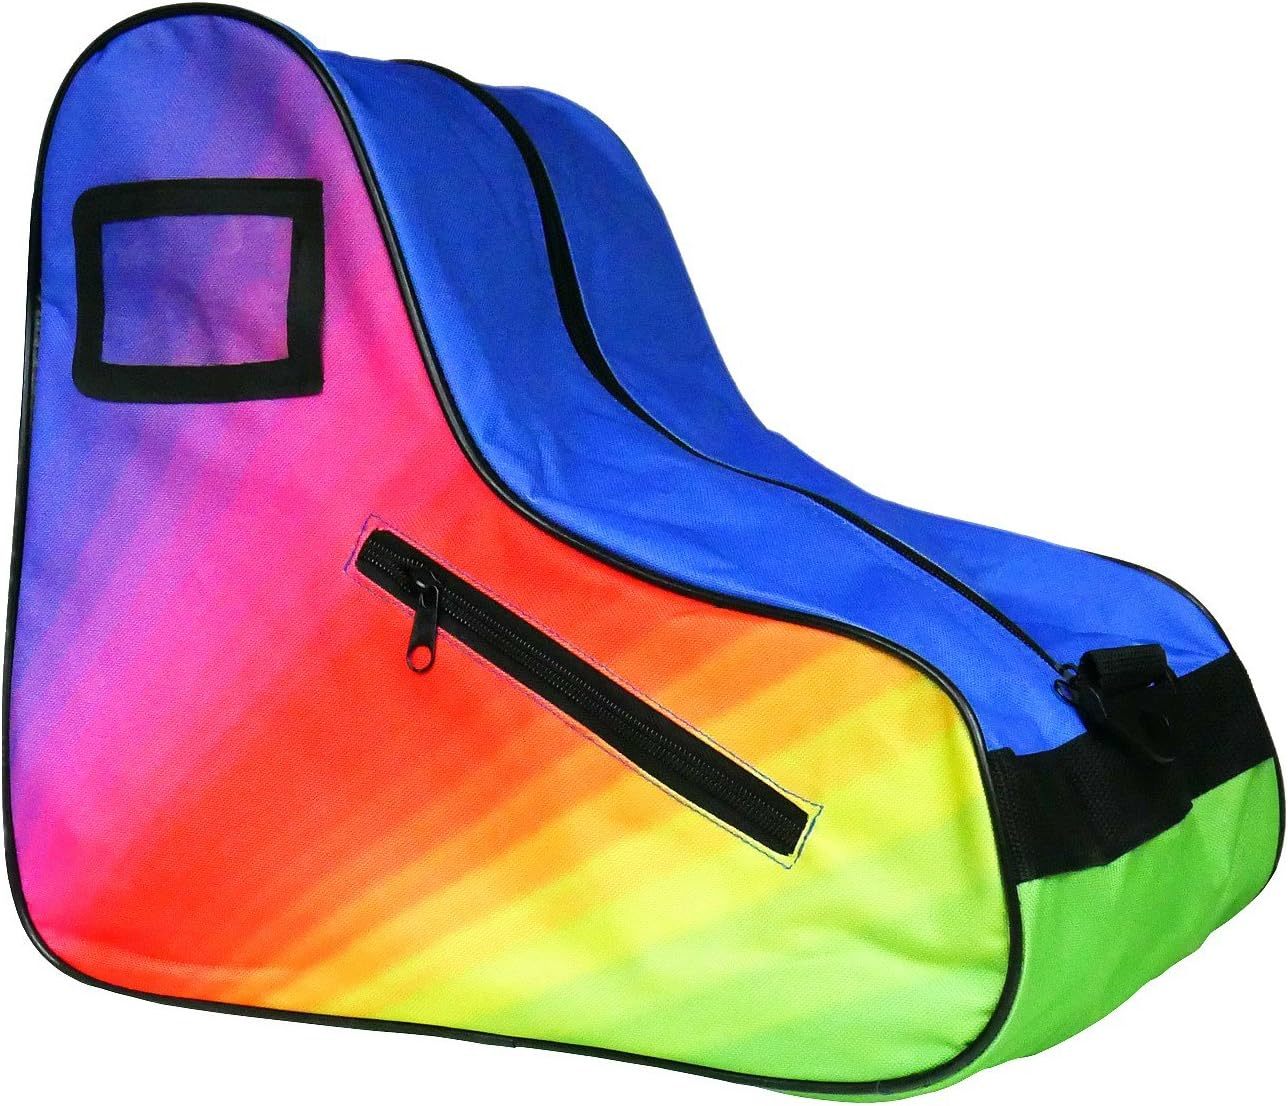 Primary image for Epic Limited Edition Rainbow Roller Skate Bag